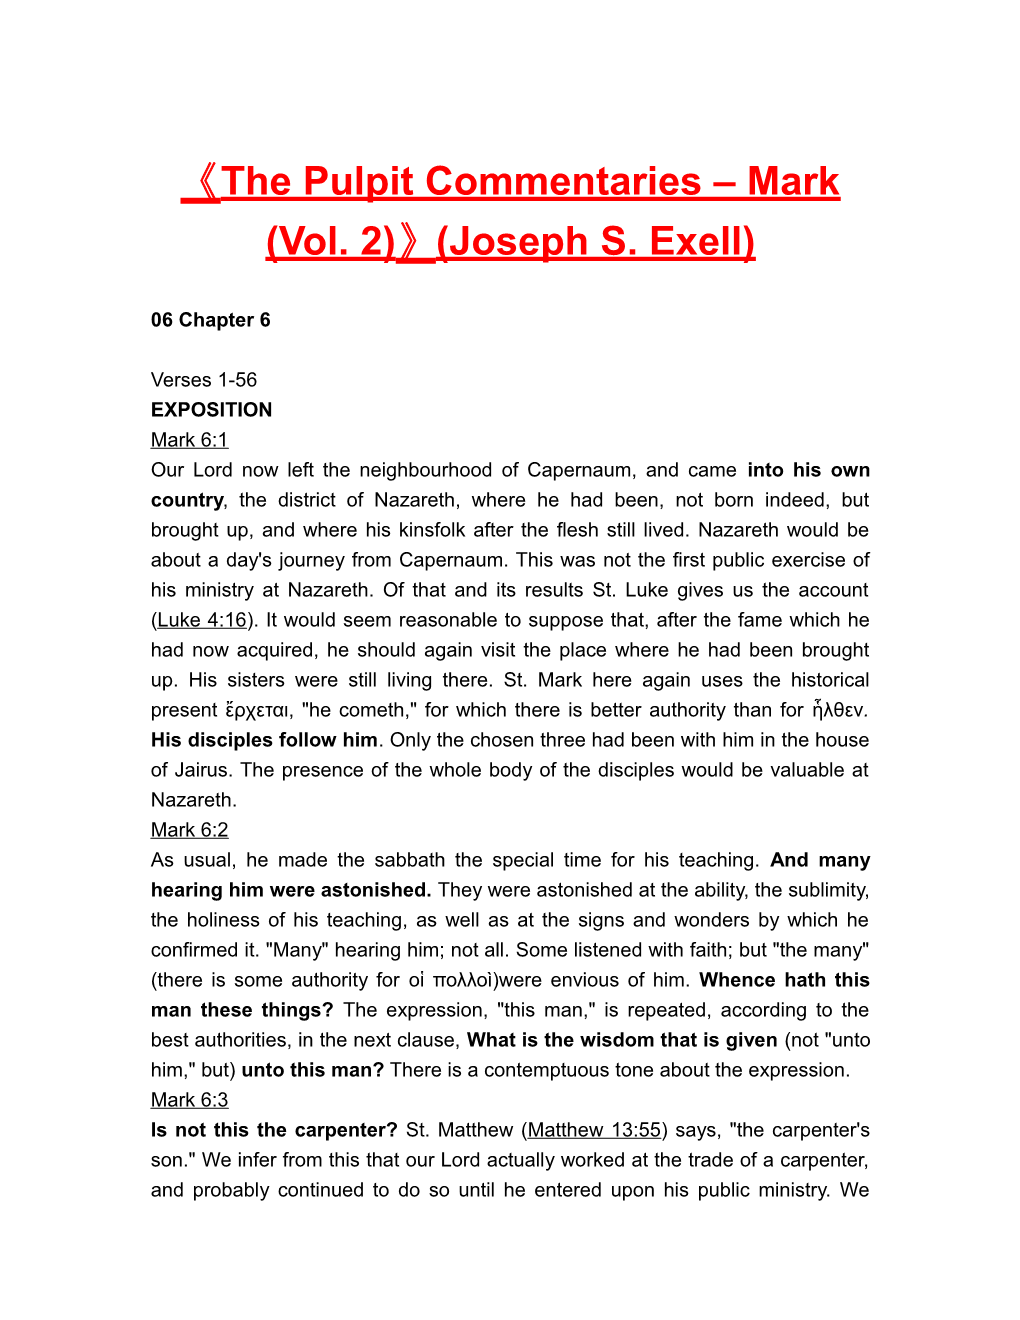 The Pulpit Commentaries Mark (Vol. 2) (Joseph S. Exell)